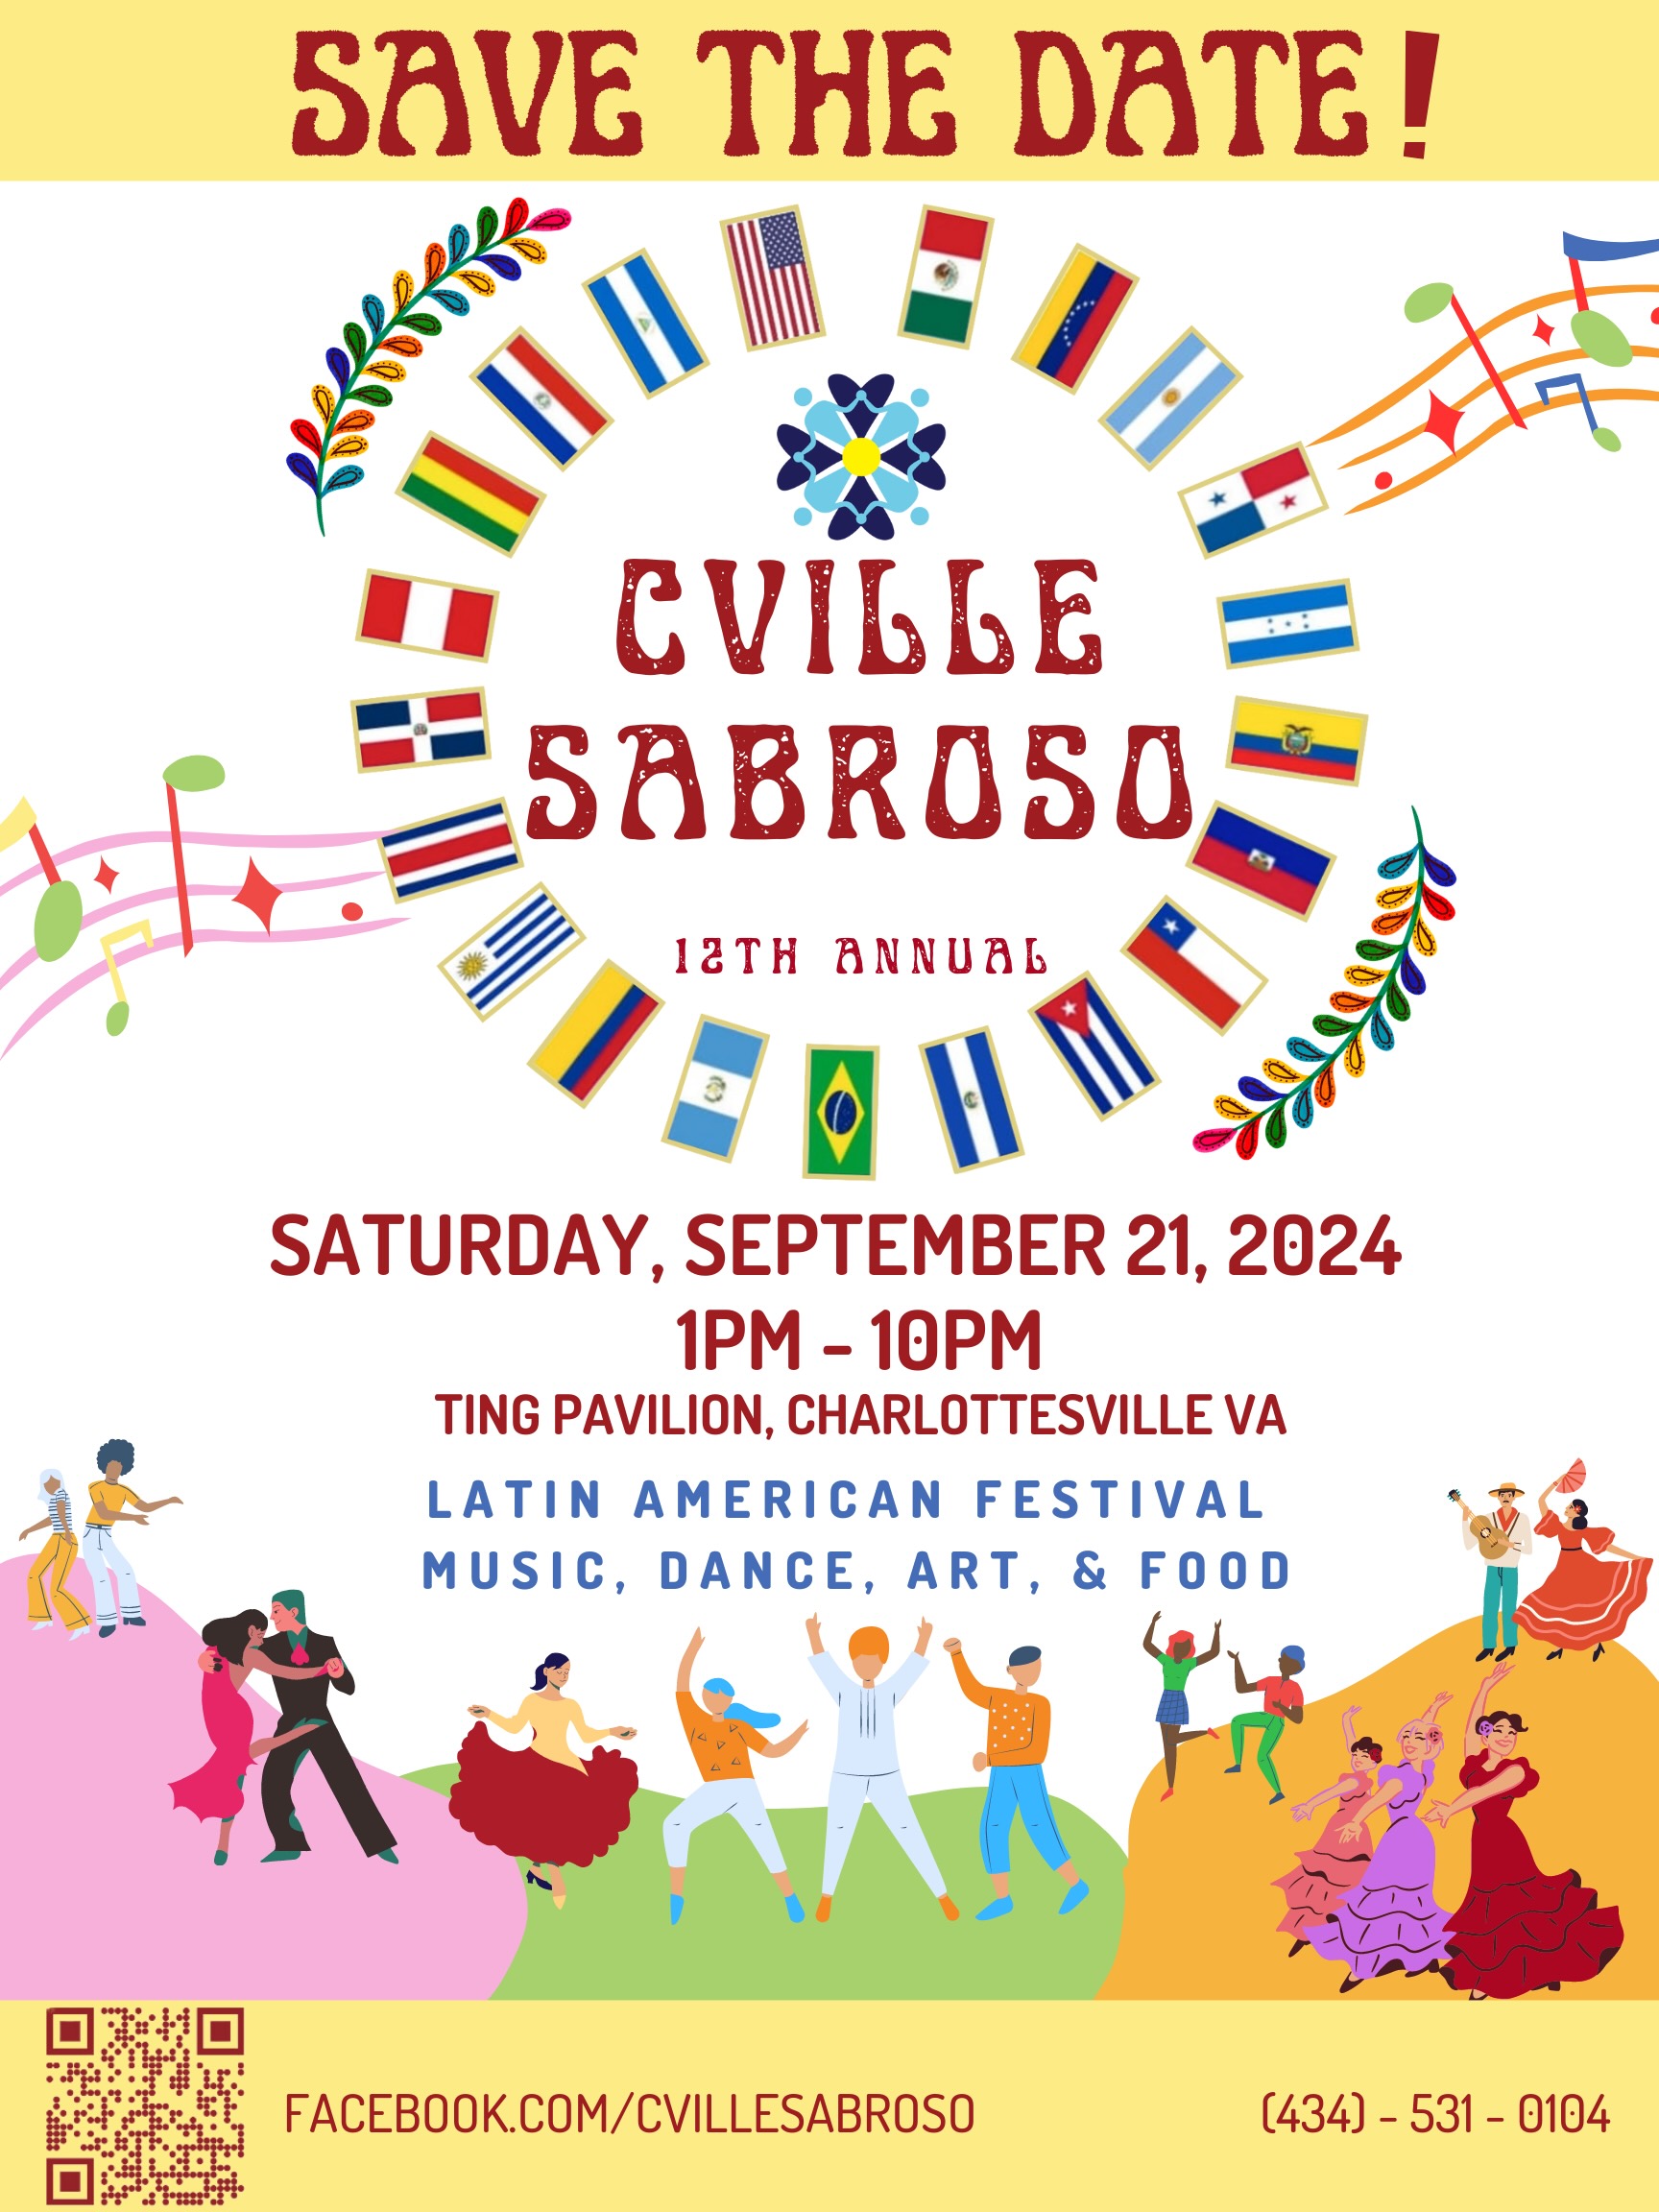 "Save the Date" poster in English for Cville Sabroso 2024. The Sin Barreras blue flower logo and the words Cville Sabroso 12th annual" are in the middle of a circle formed by the flags of Central and South American countries. Date+Time+Location are given (September 21, 1-10pm, Ting Pavilion) and at the bottom are scenes of stylized people dancing in both modern and traditional attire.